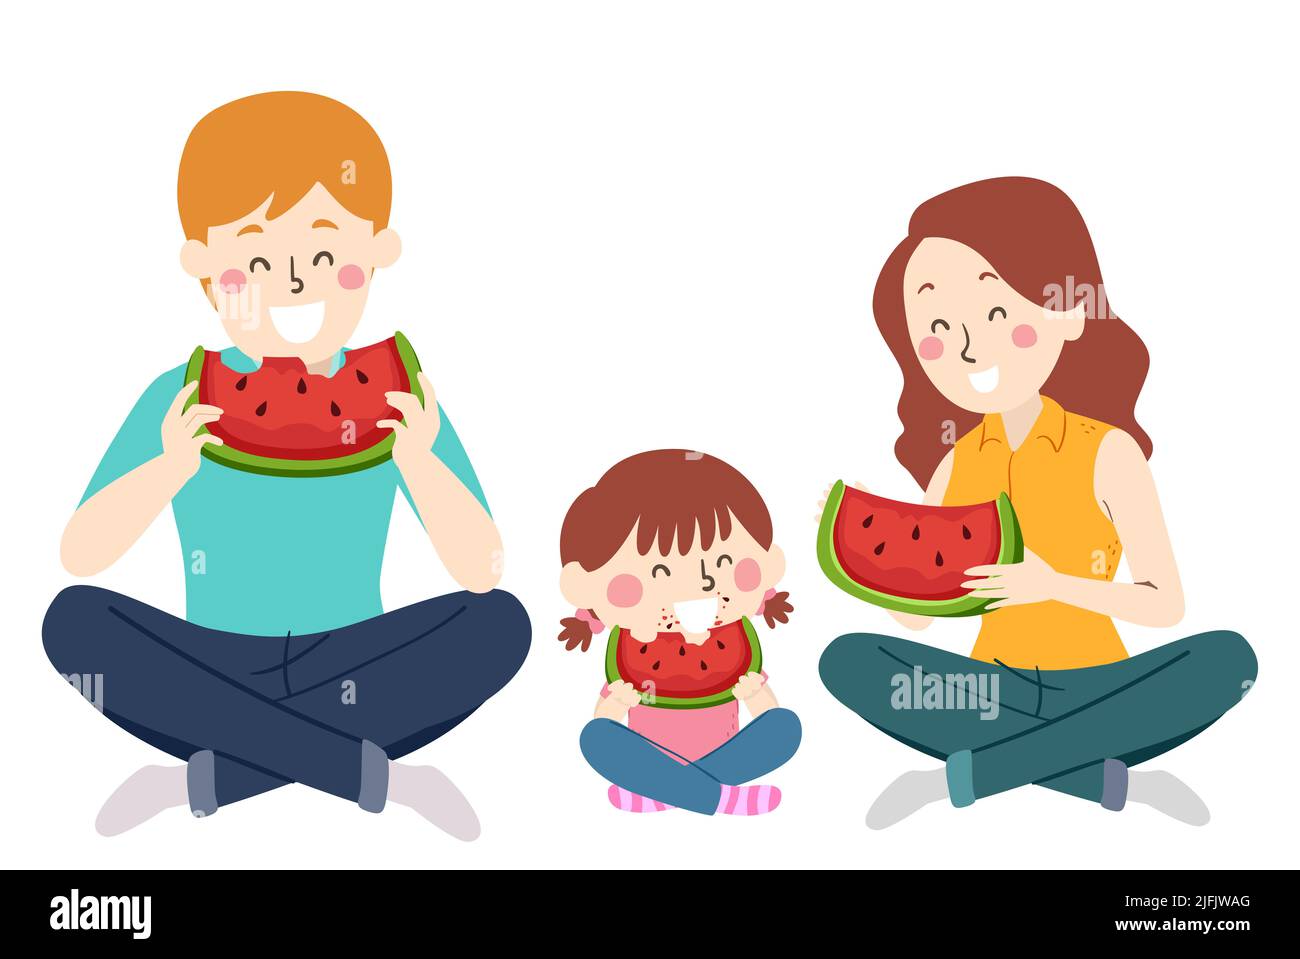 Illustration of Kid Girl with Parents Sitting Cross Legged on the Floor. Happy Family Eating Watermelon Together Stock Photo